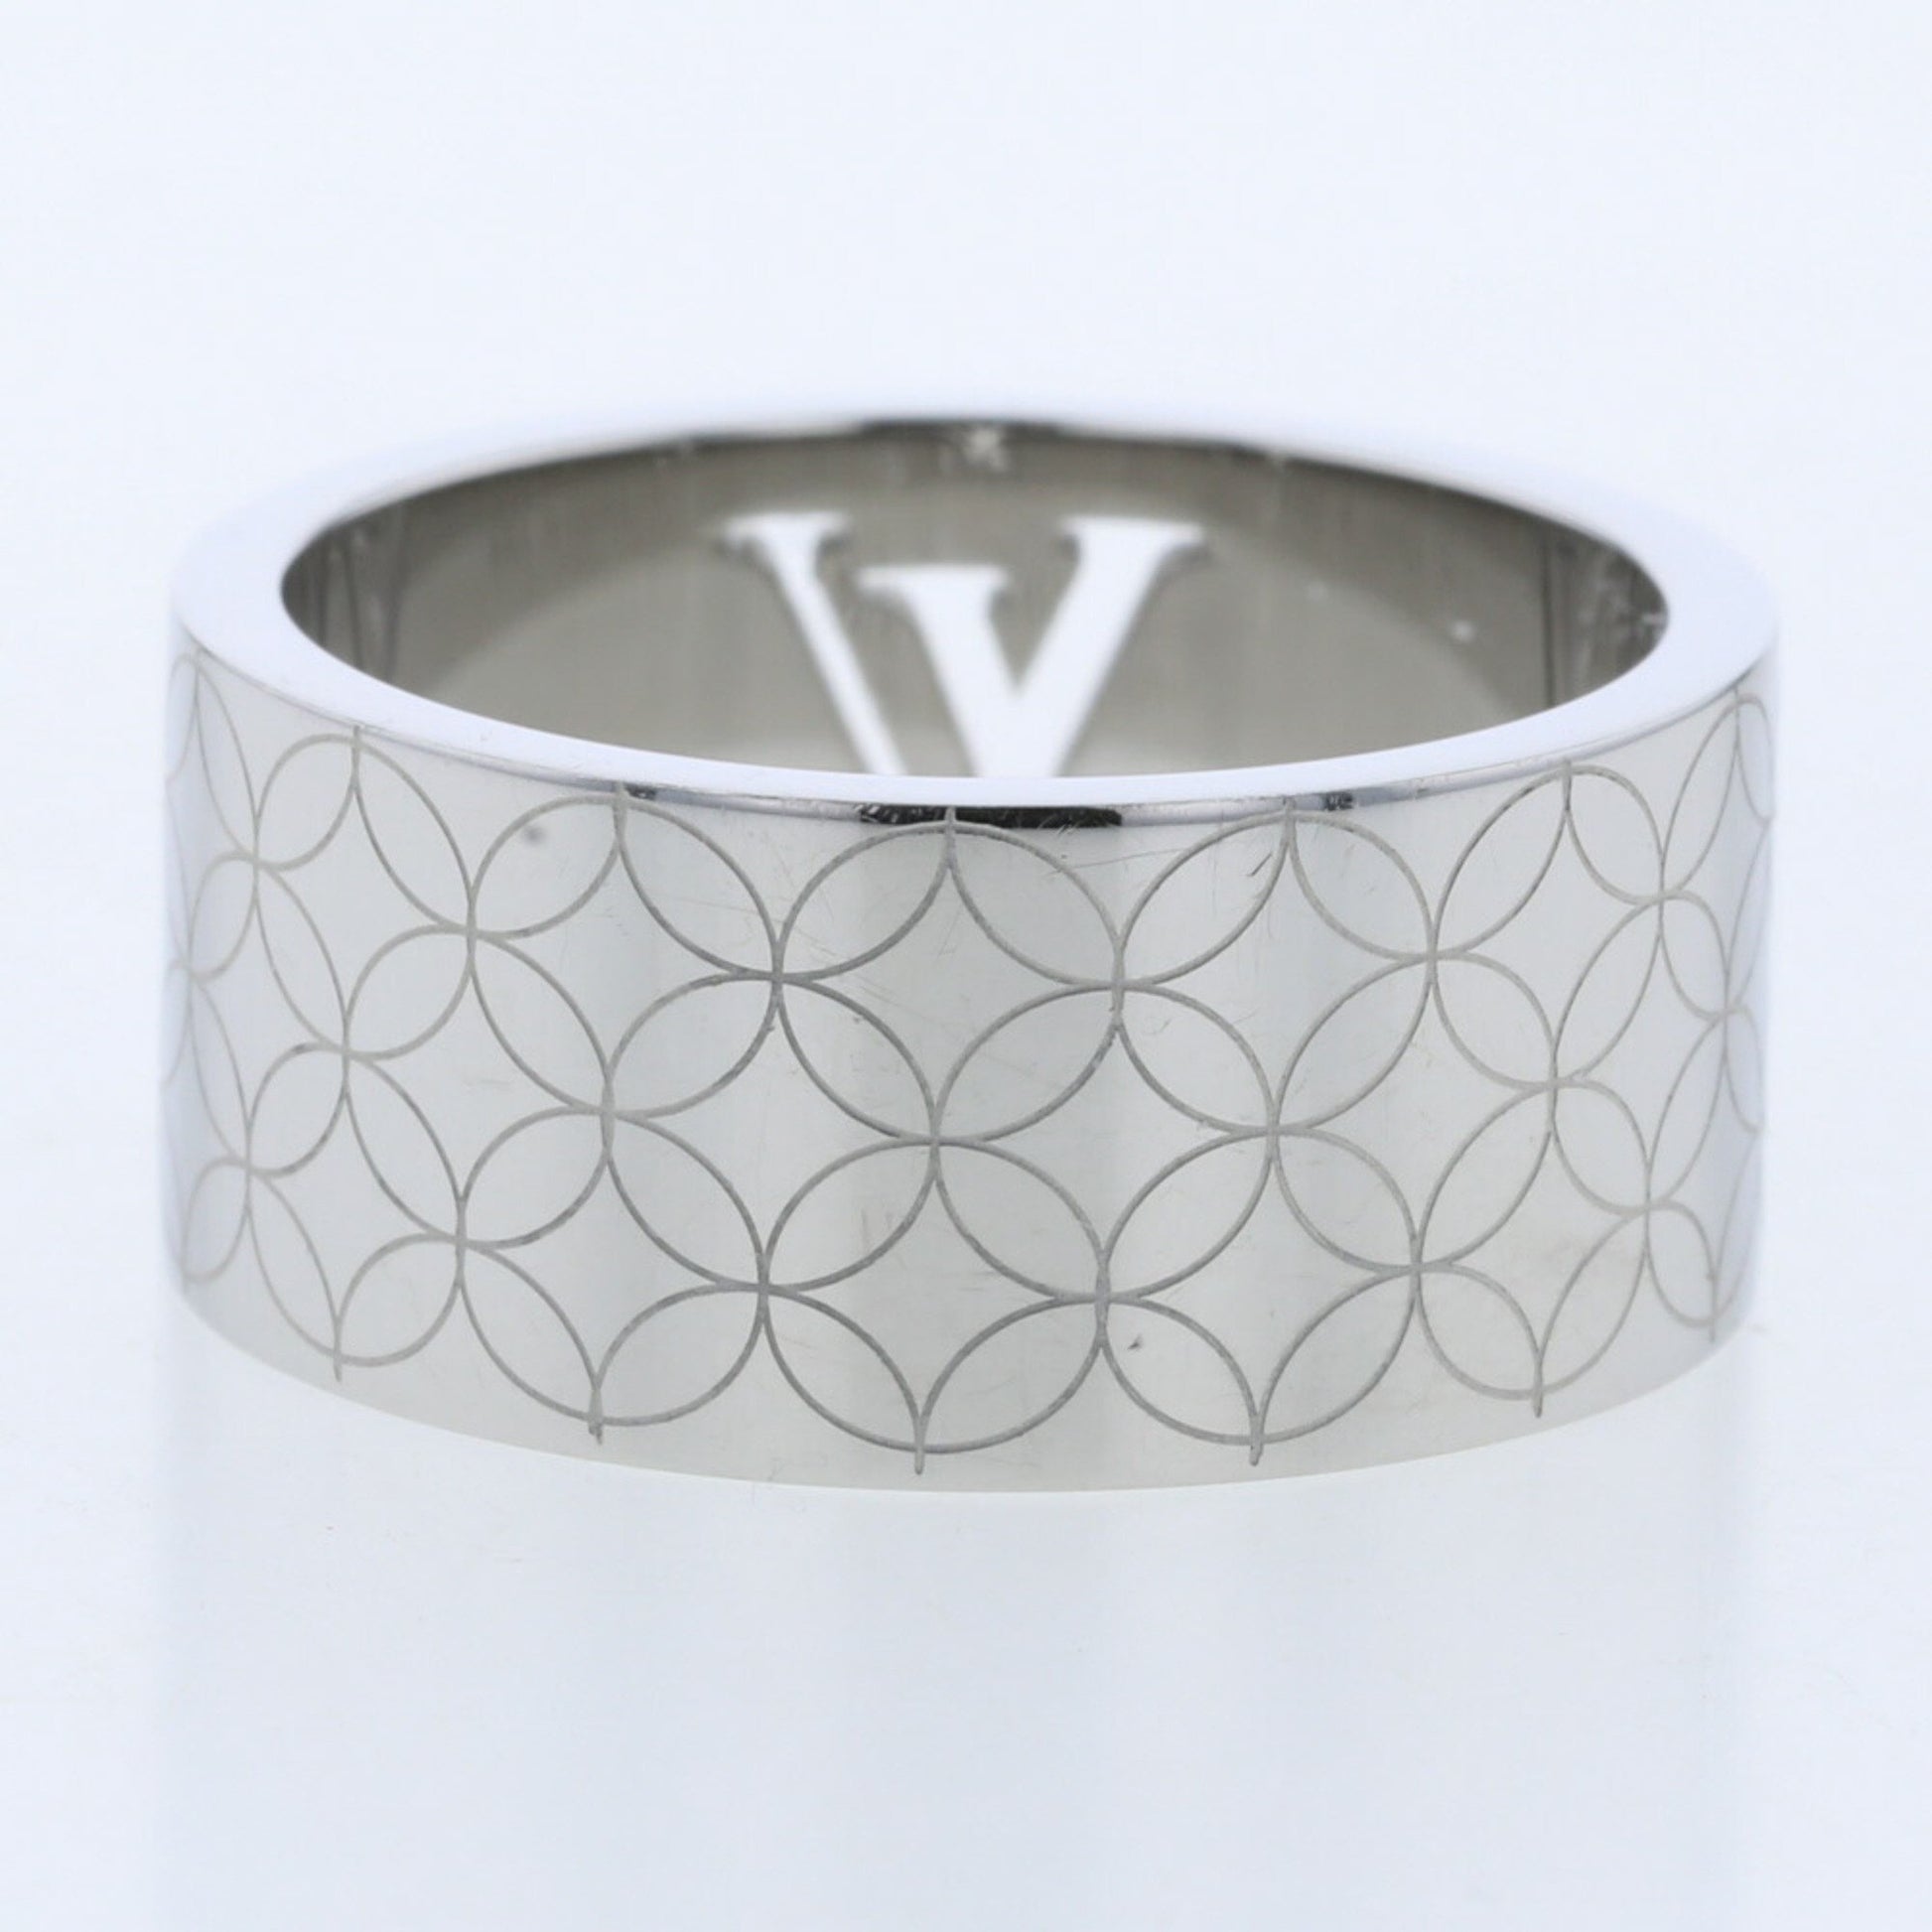 Louis Vuitton, Jewelry, Louis Vuitton Ring S Berg Champs Elysees Silver  Metal Material M65456